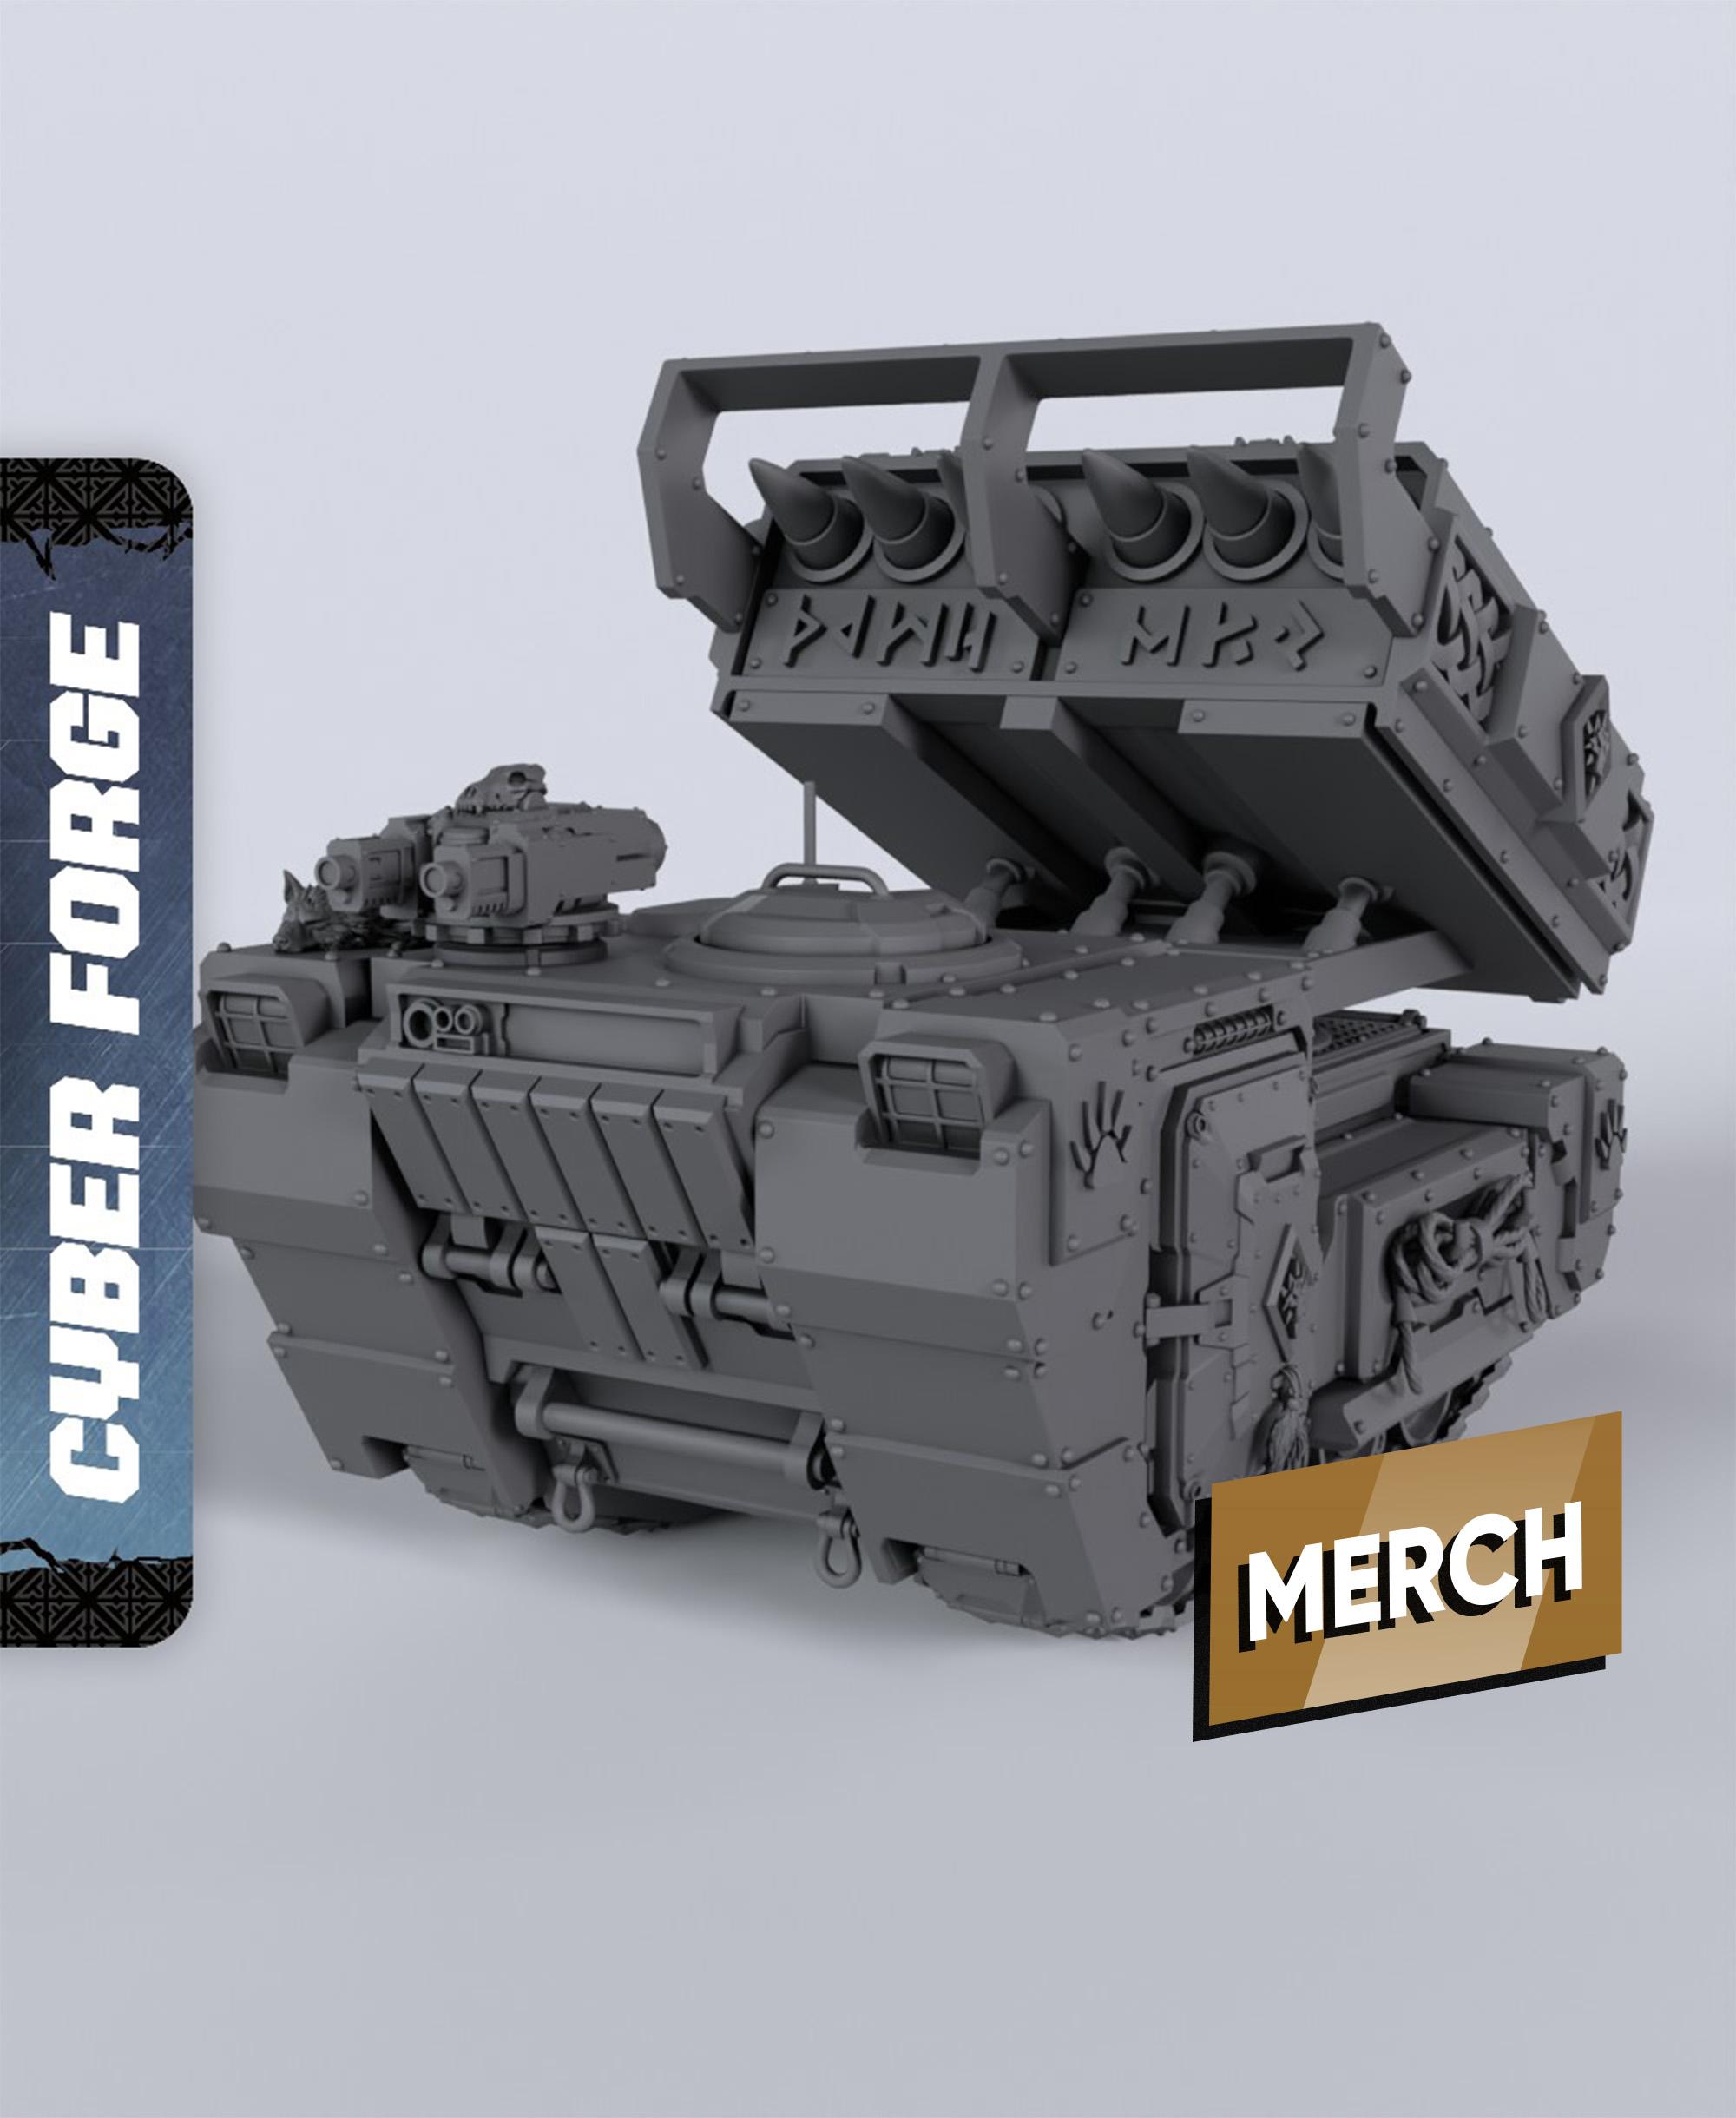 WHD Starhowler - With Free Cyberpunk Warhammer - 40k Sci-Fi Gift Ideas for RPG and Wargamers 3d model